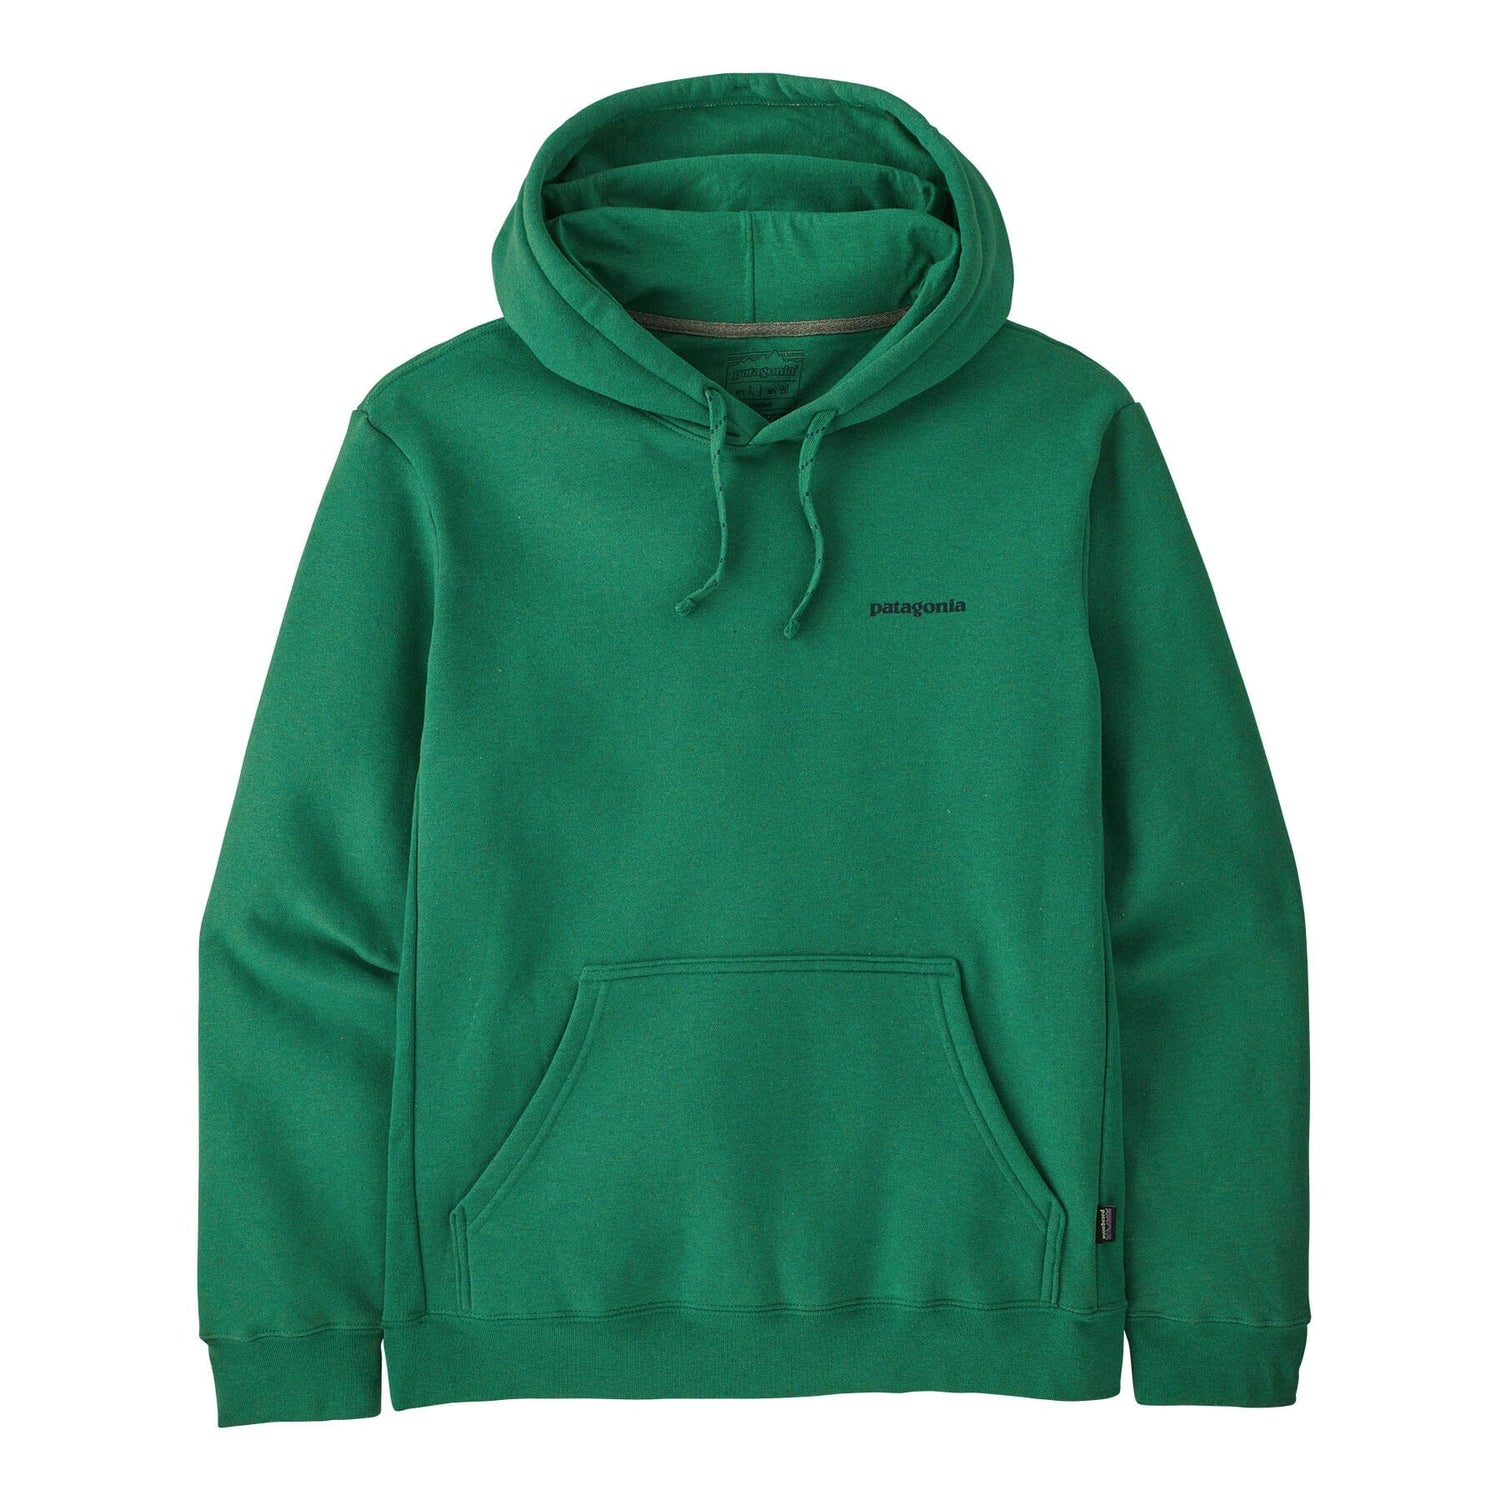 Boardshort Logo Uprisal Hoody - Recycled polyester & recycled cotton fleece Shirt Patagonia Gather Green S 